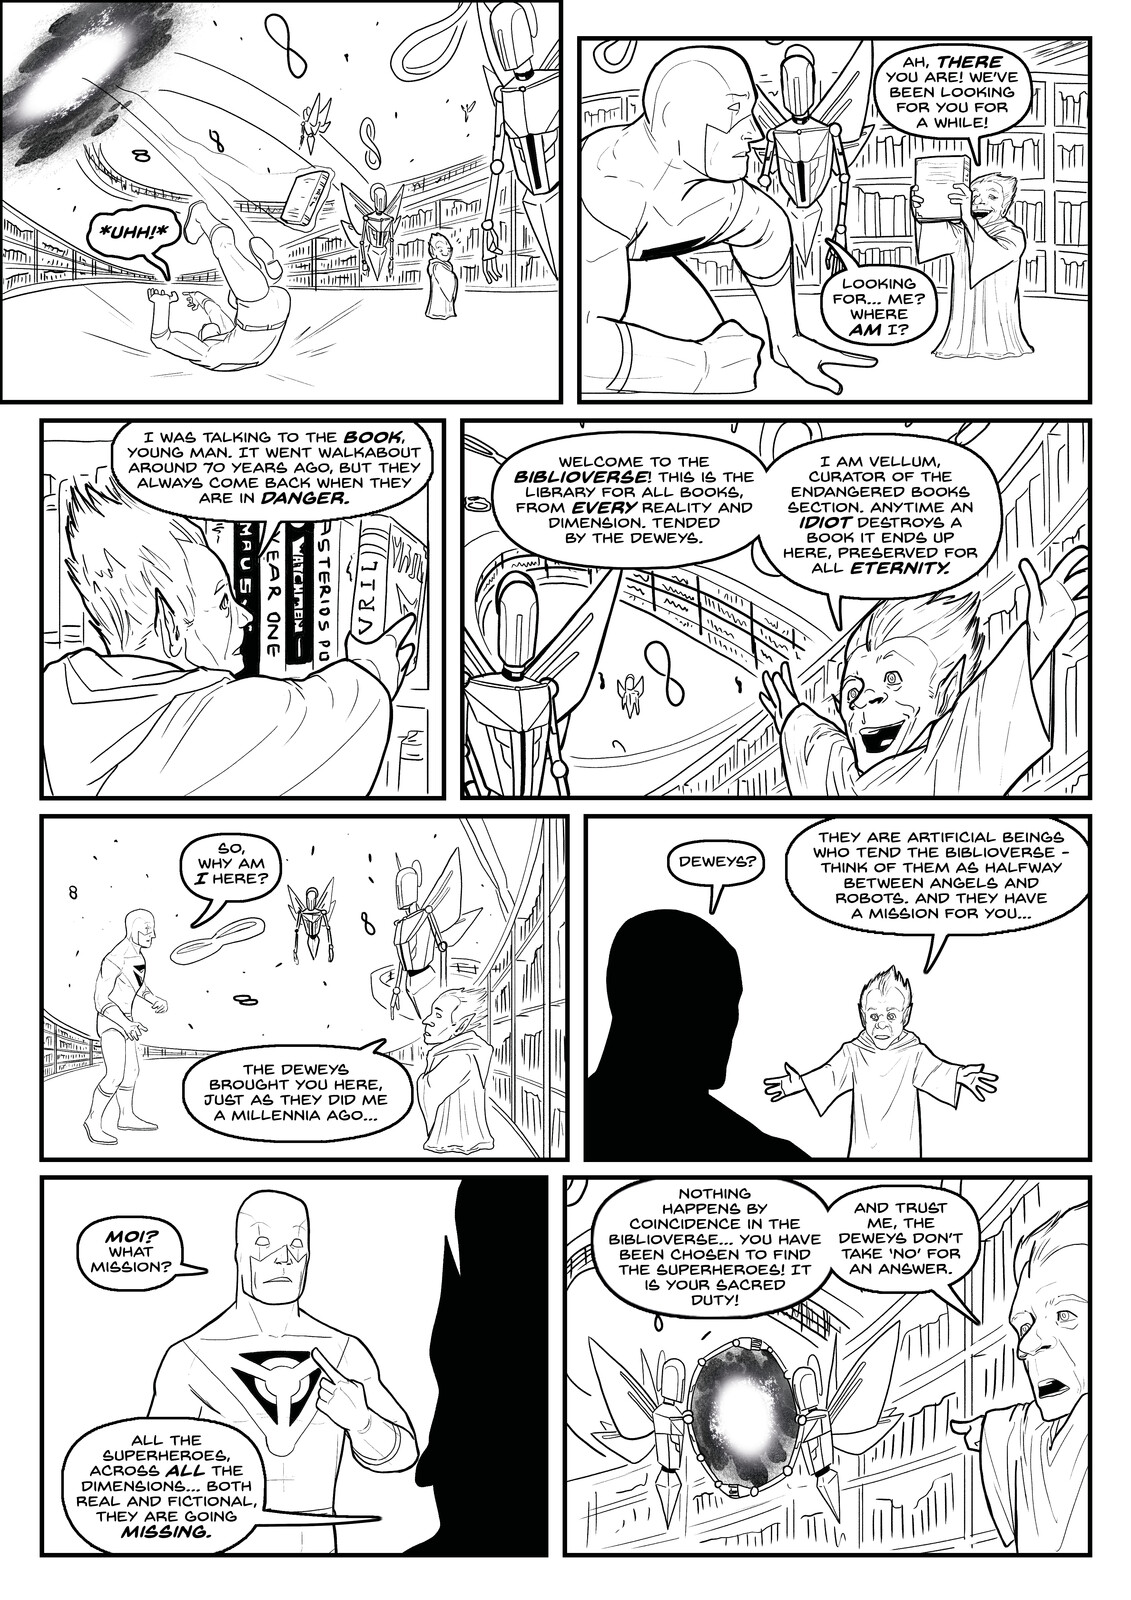 Page 4 Inks and Letters